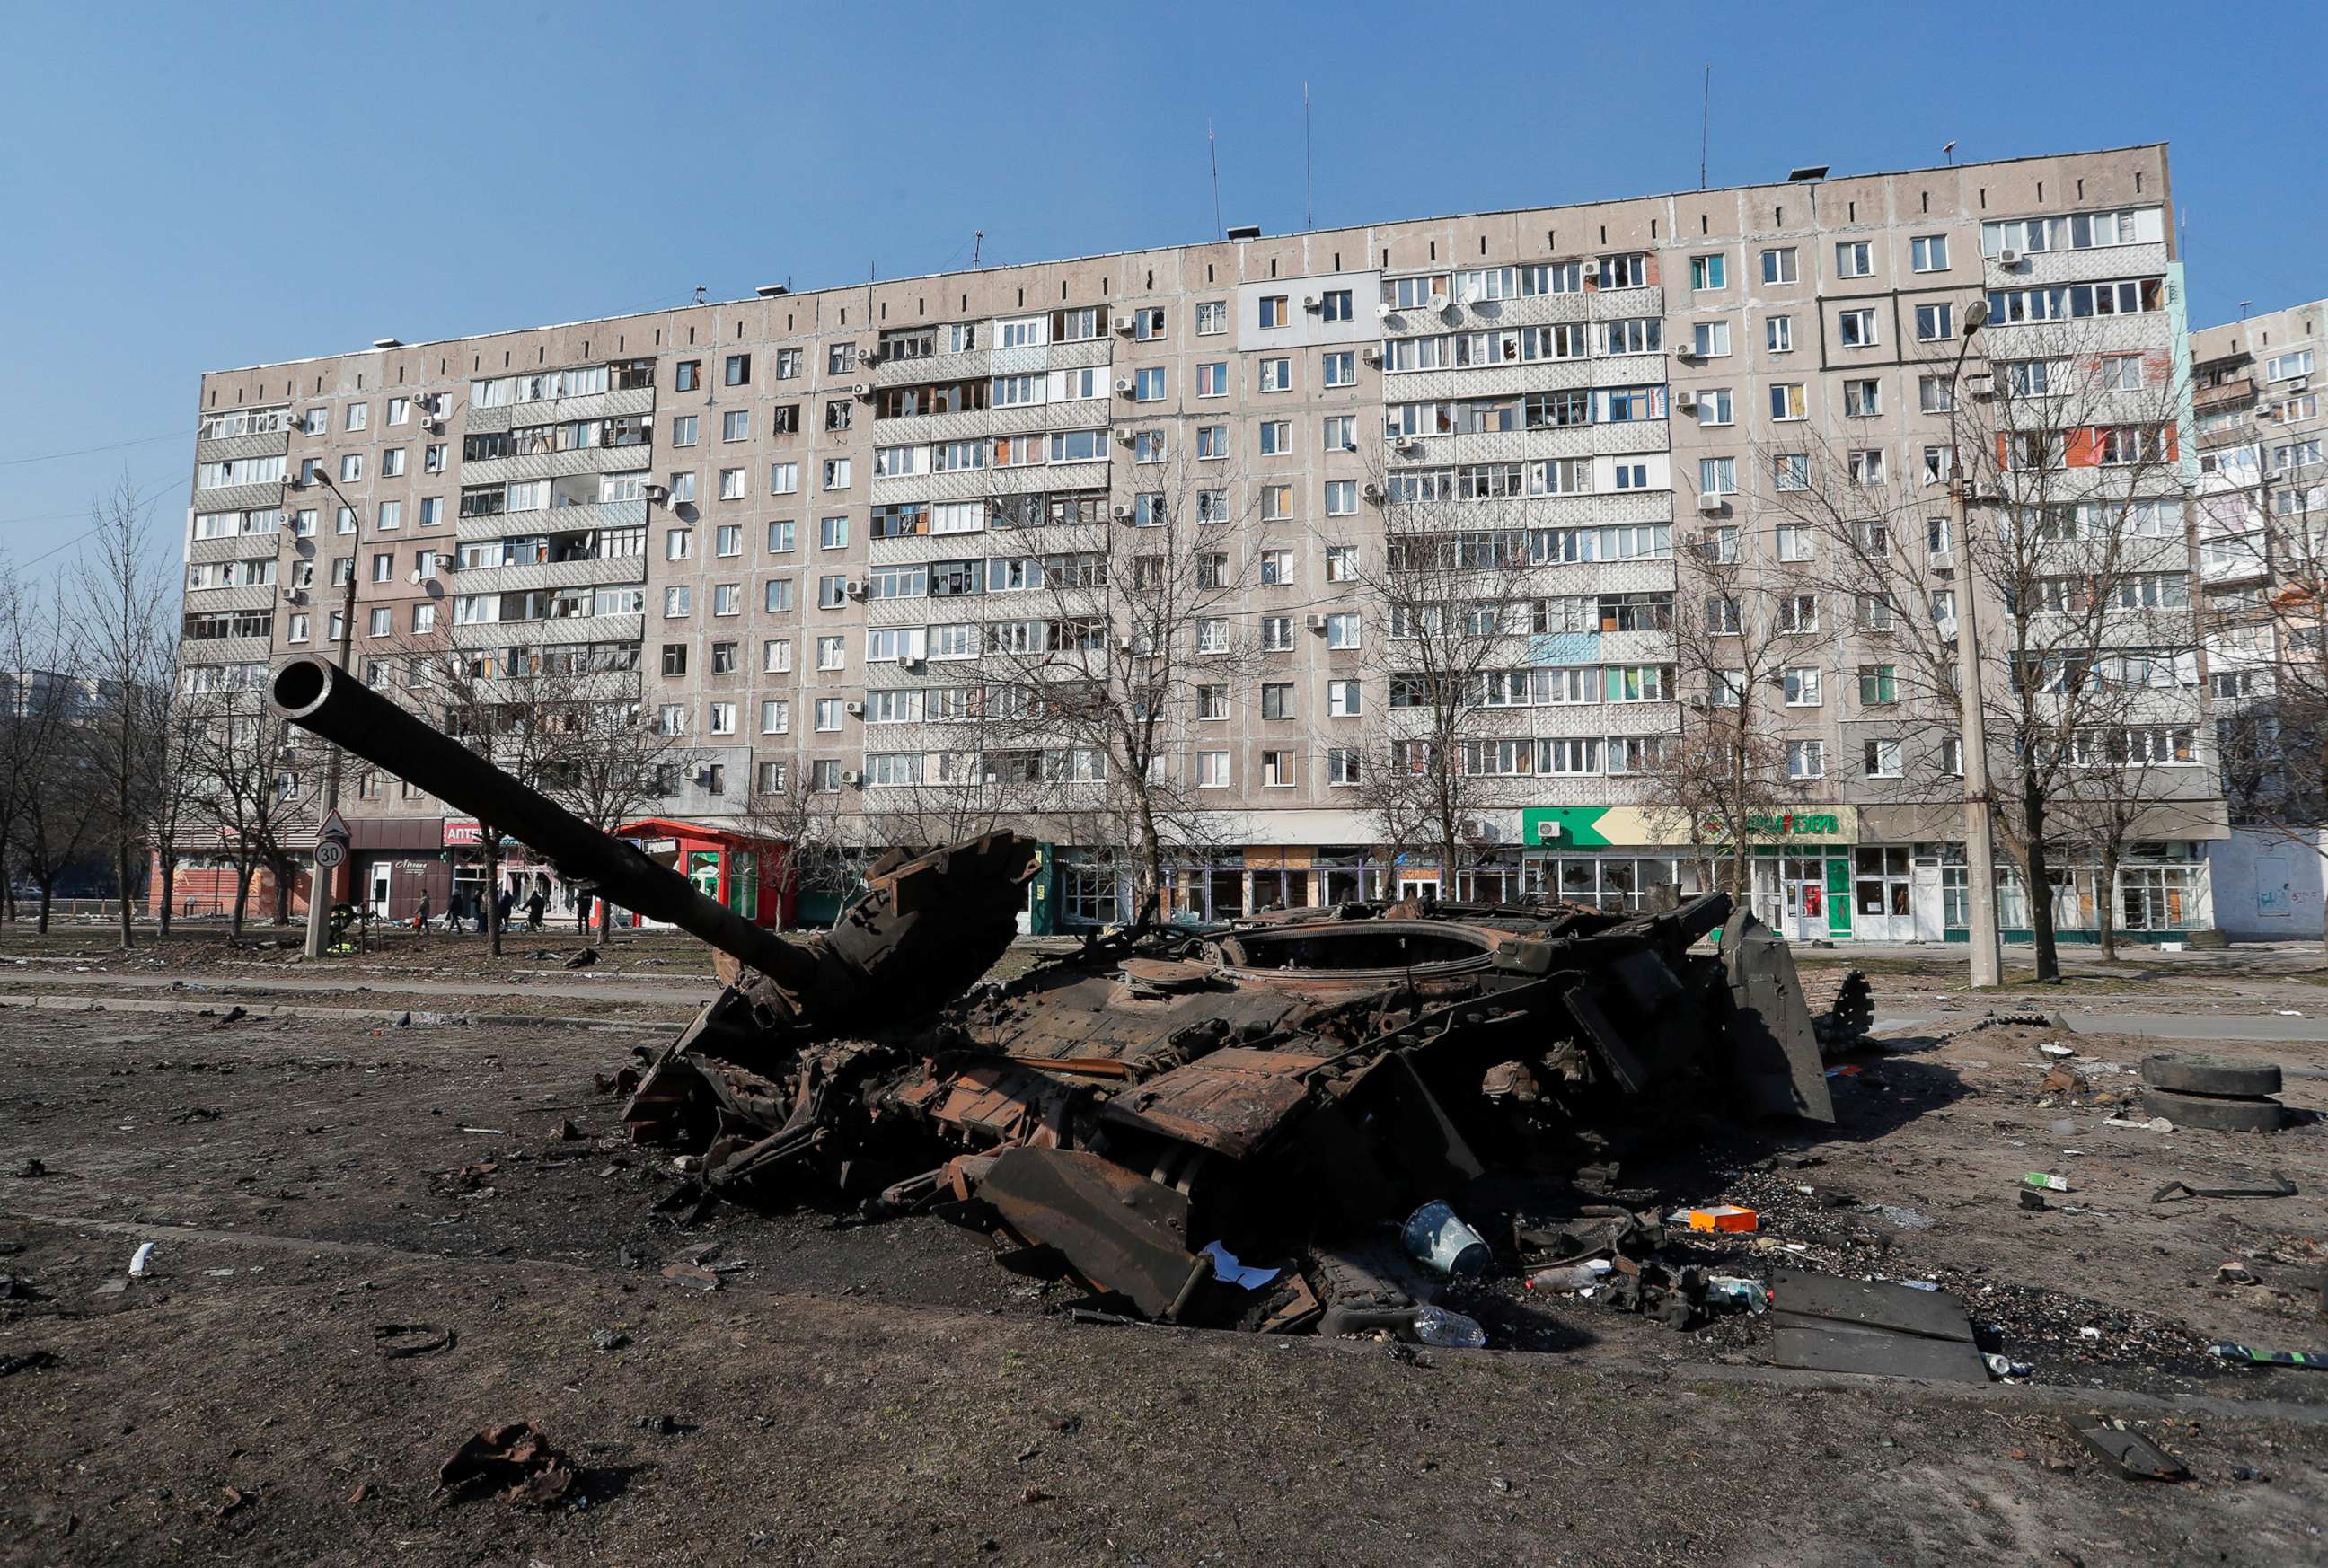 PHOTO: A tank destroyed in fighting during Ukraine-Russia conflict is seen in front of a residential building, in the besieged southern port of Mariupol, Ukraine, March 23, 2022.  